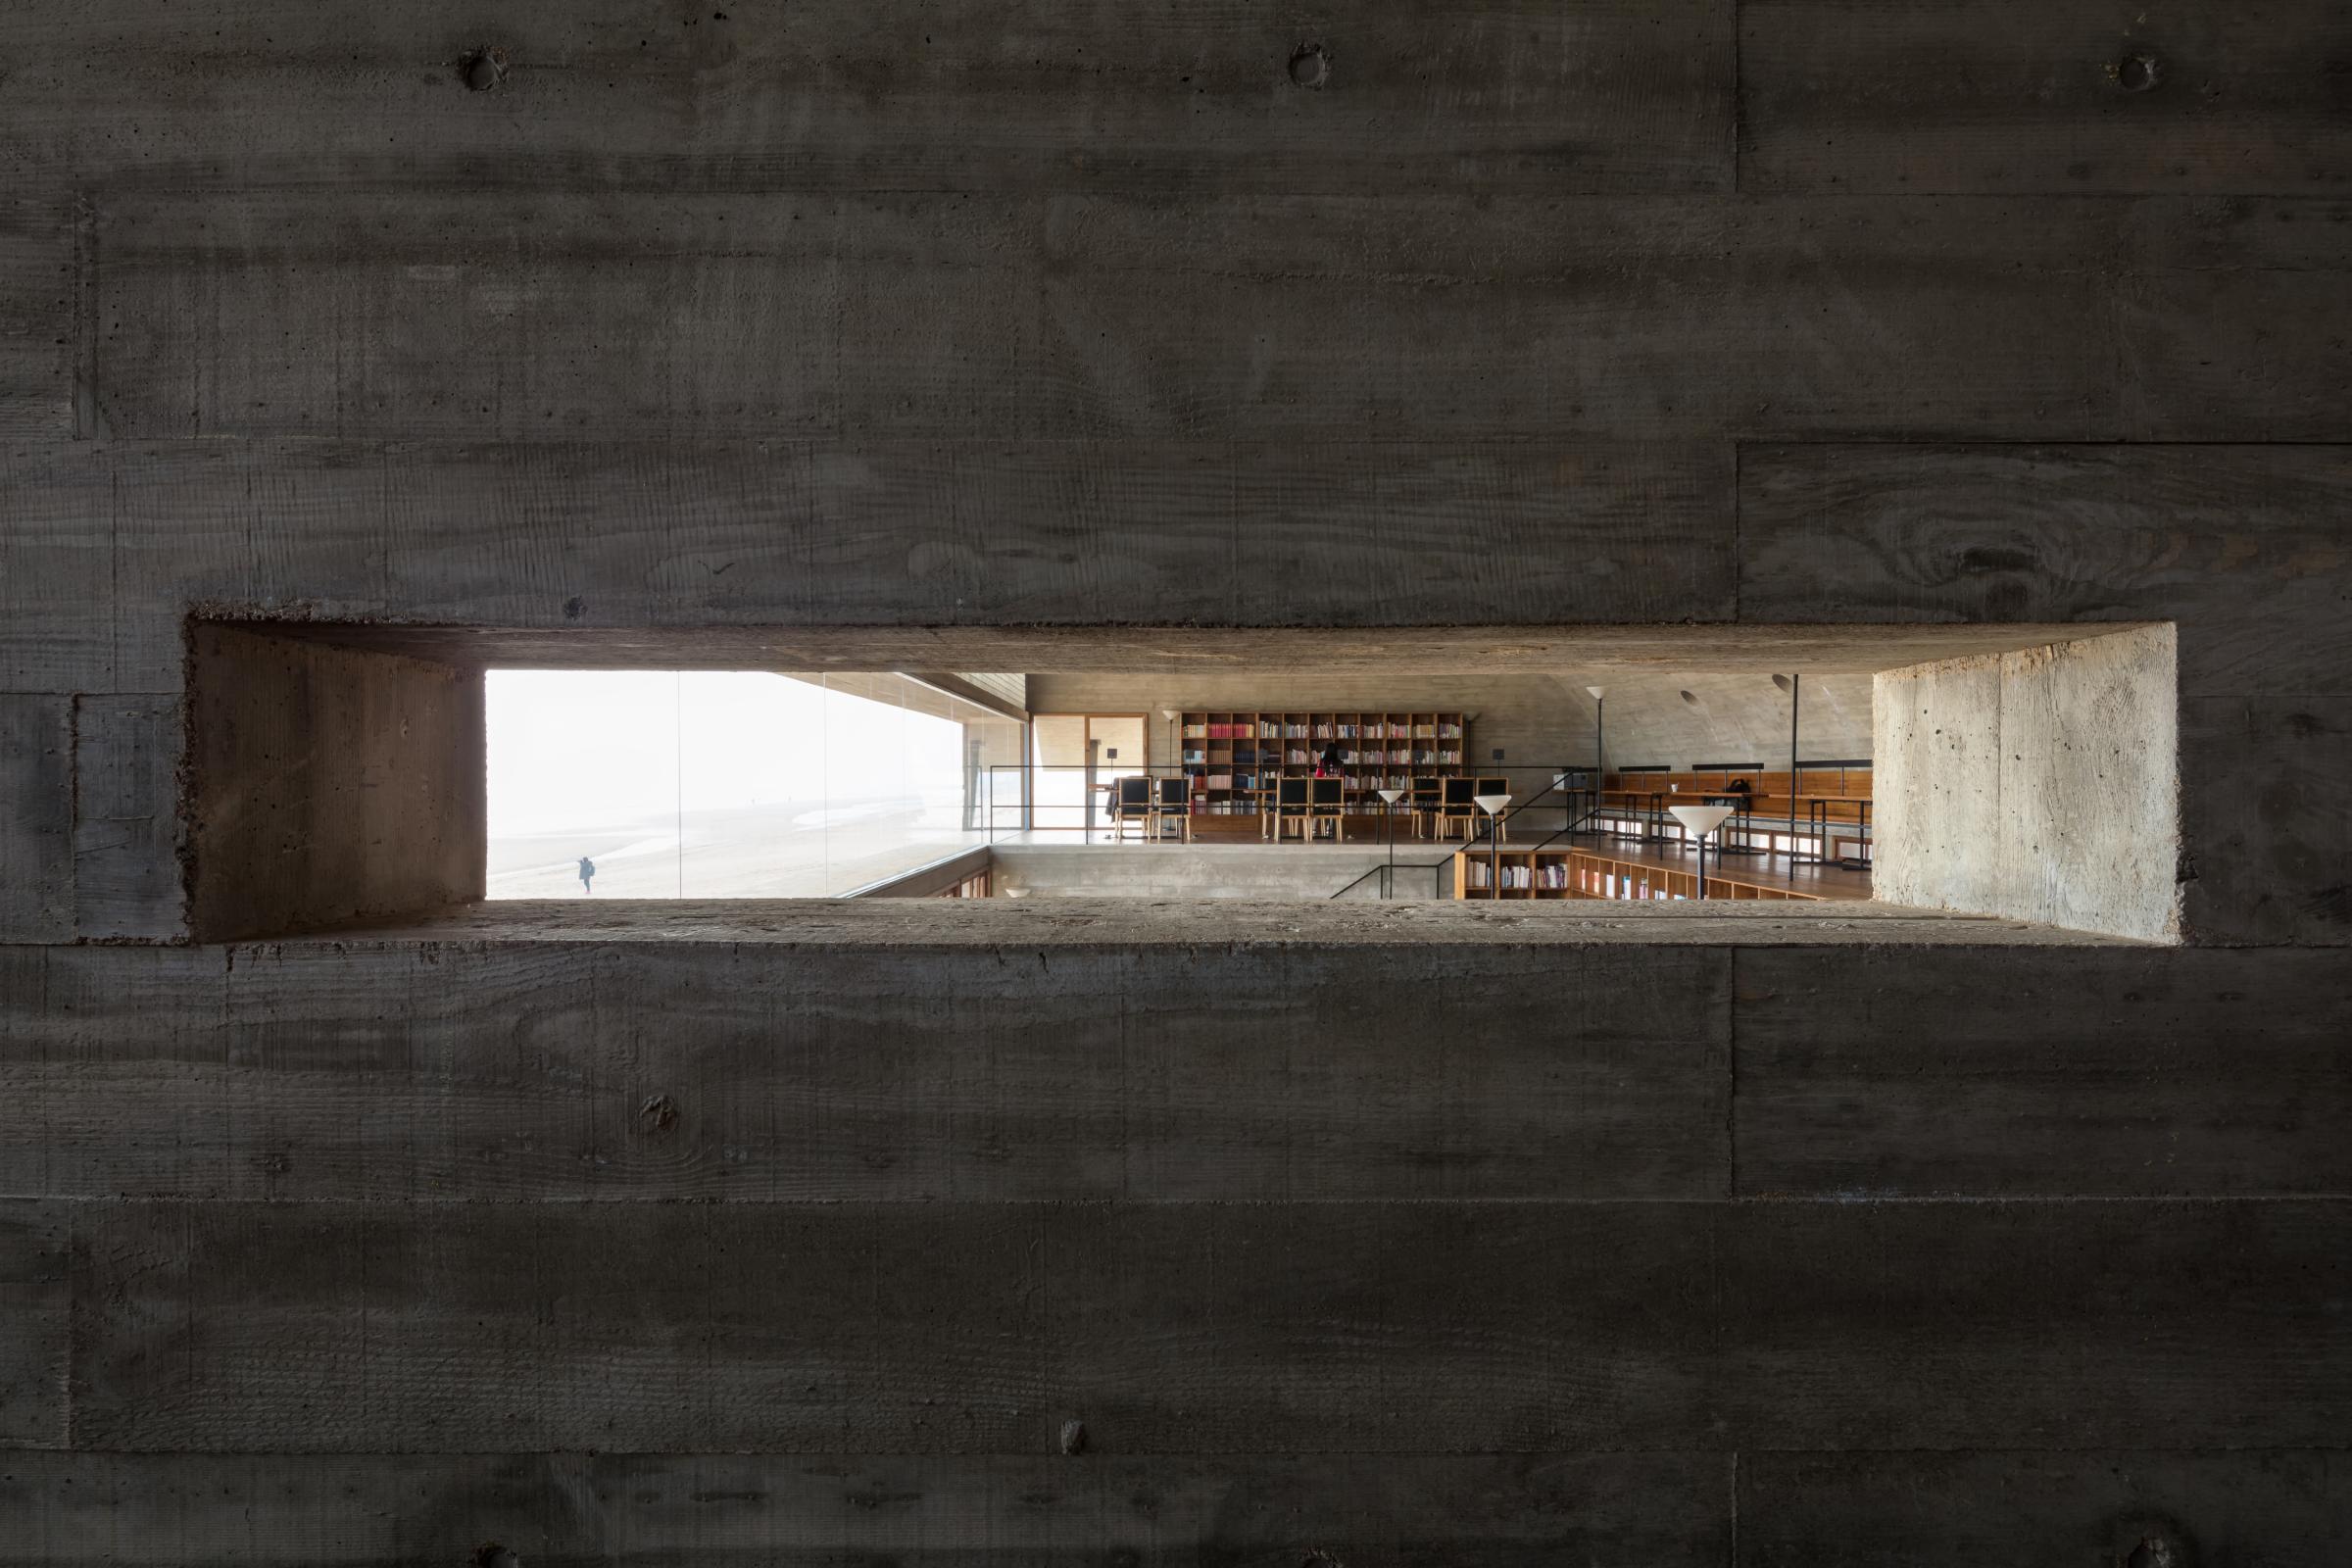 Photograph of Seashore Library, designed by Vector Architects and located in Beidaihe, China